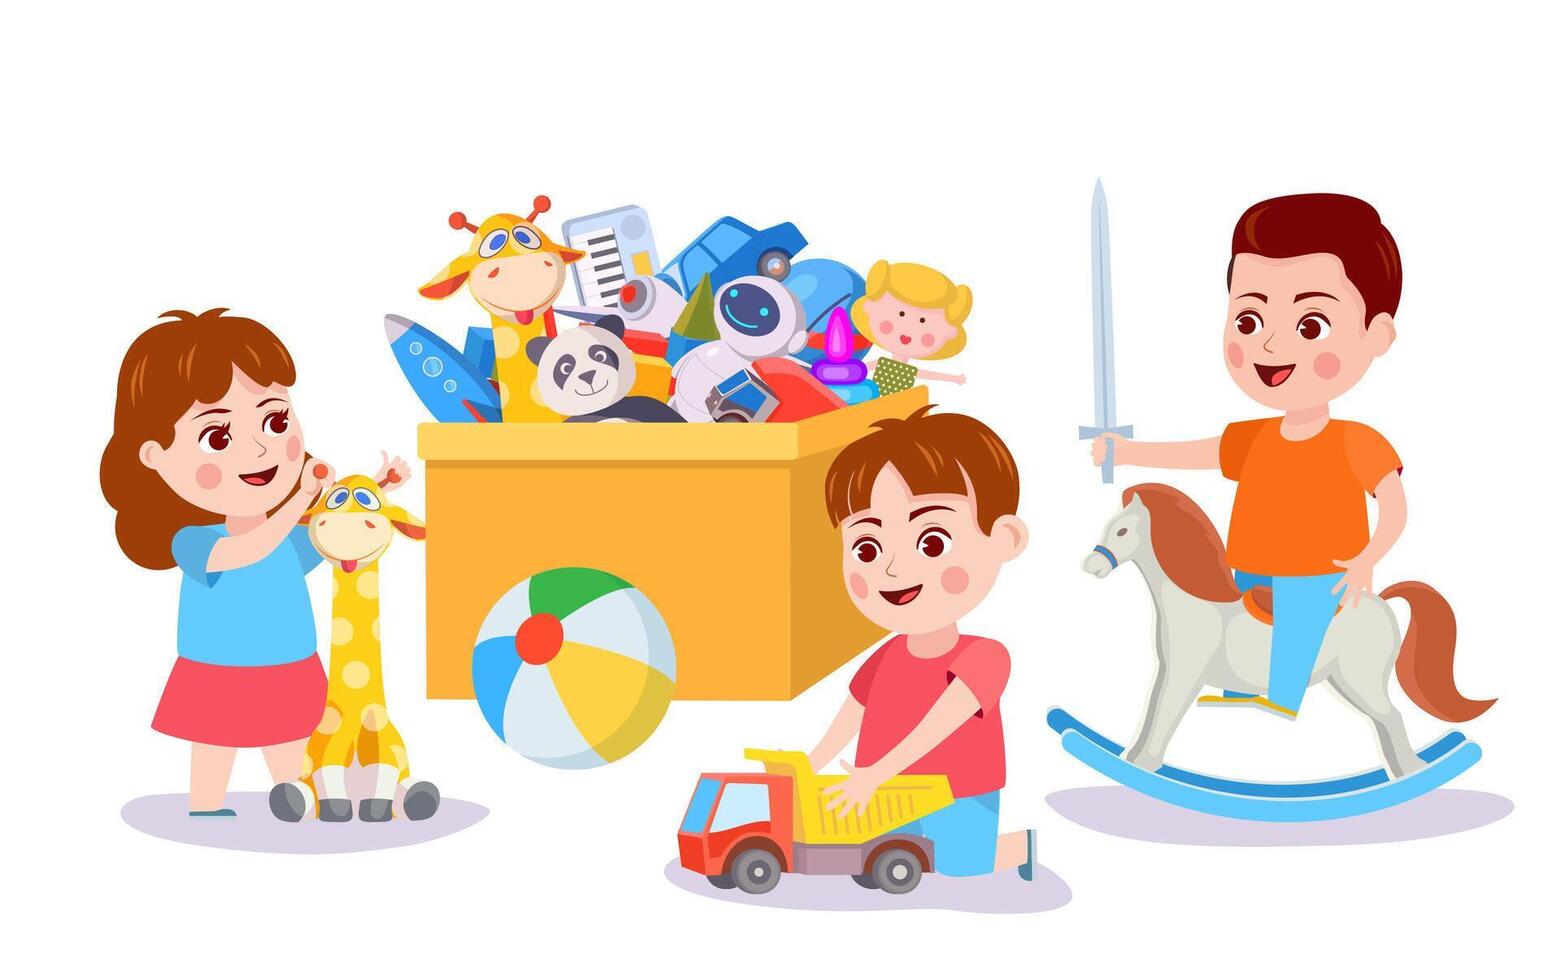 Kid playing with toys. Children and box with toy cars, blocks and bear. Boy play pretending on rocking horse. Kids activity vector concept